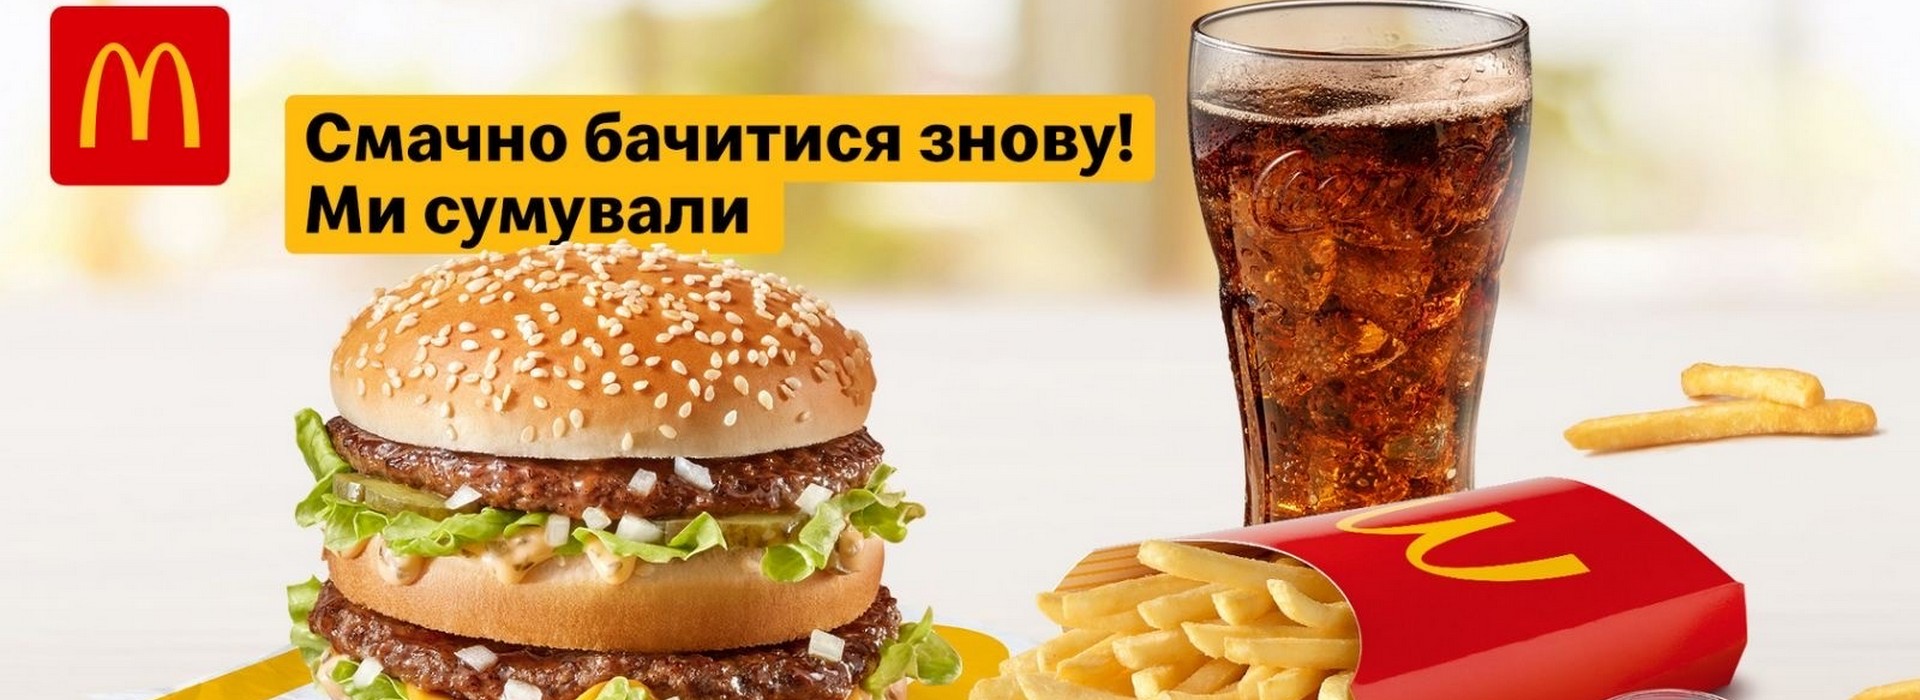 McDonald’s to Begin Phased Re-Opening in Ukraine with McDelivery